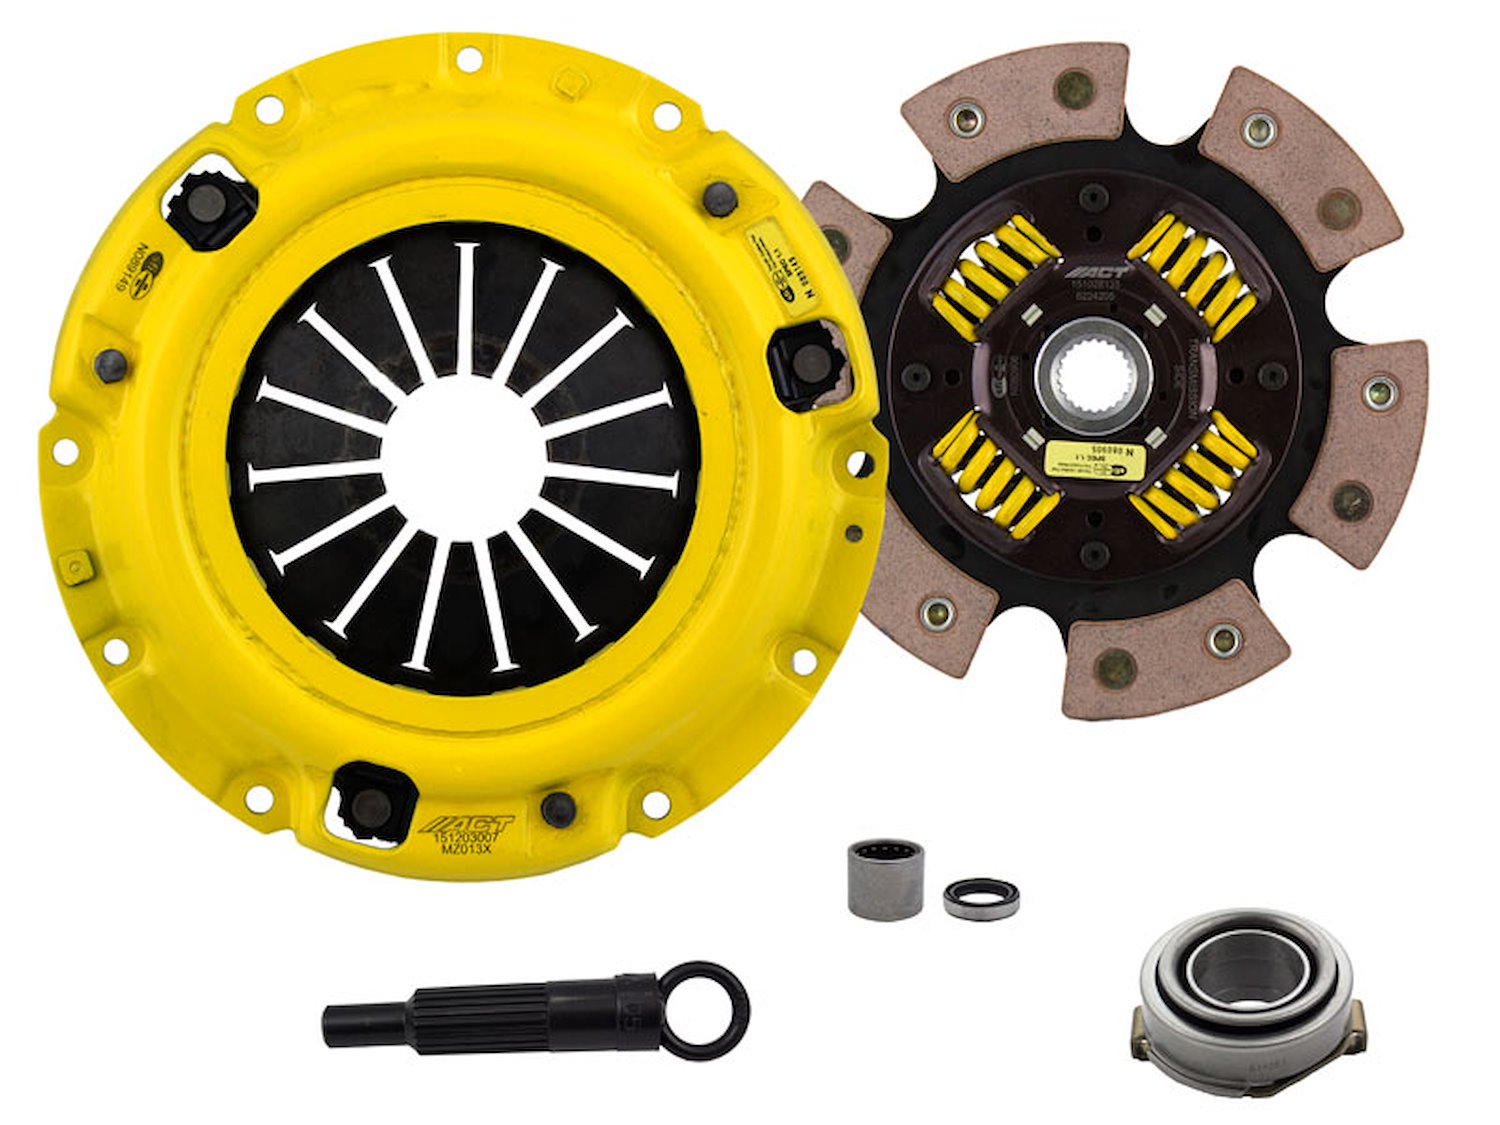 XT/Race Sprung 6-Pad Transmission Clutch Kit Fits Select Ford/Lincoln/Mercury/Mazda